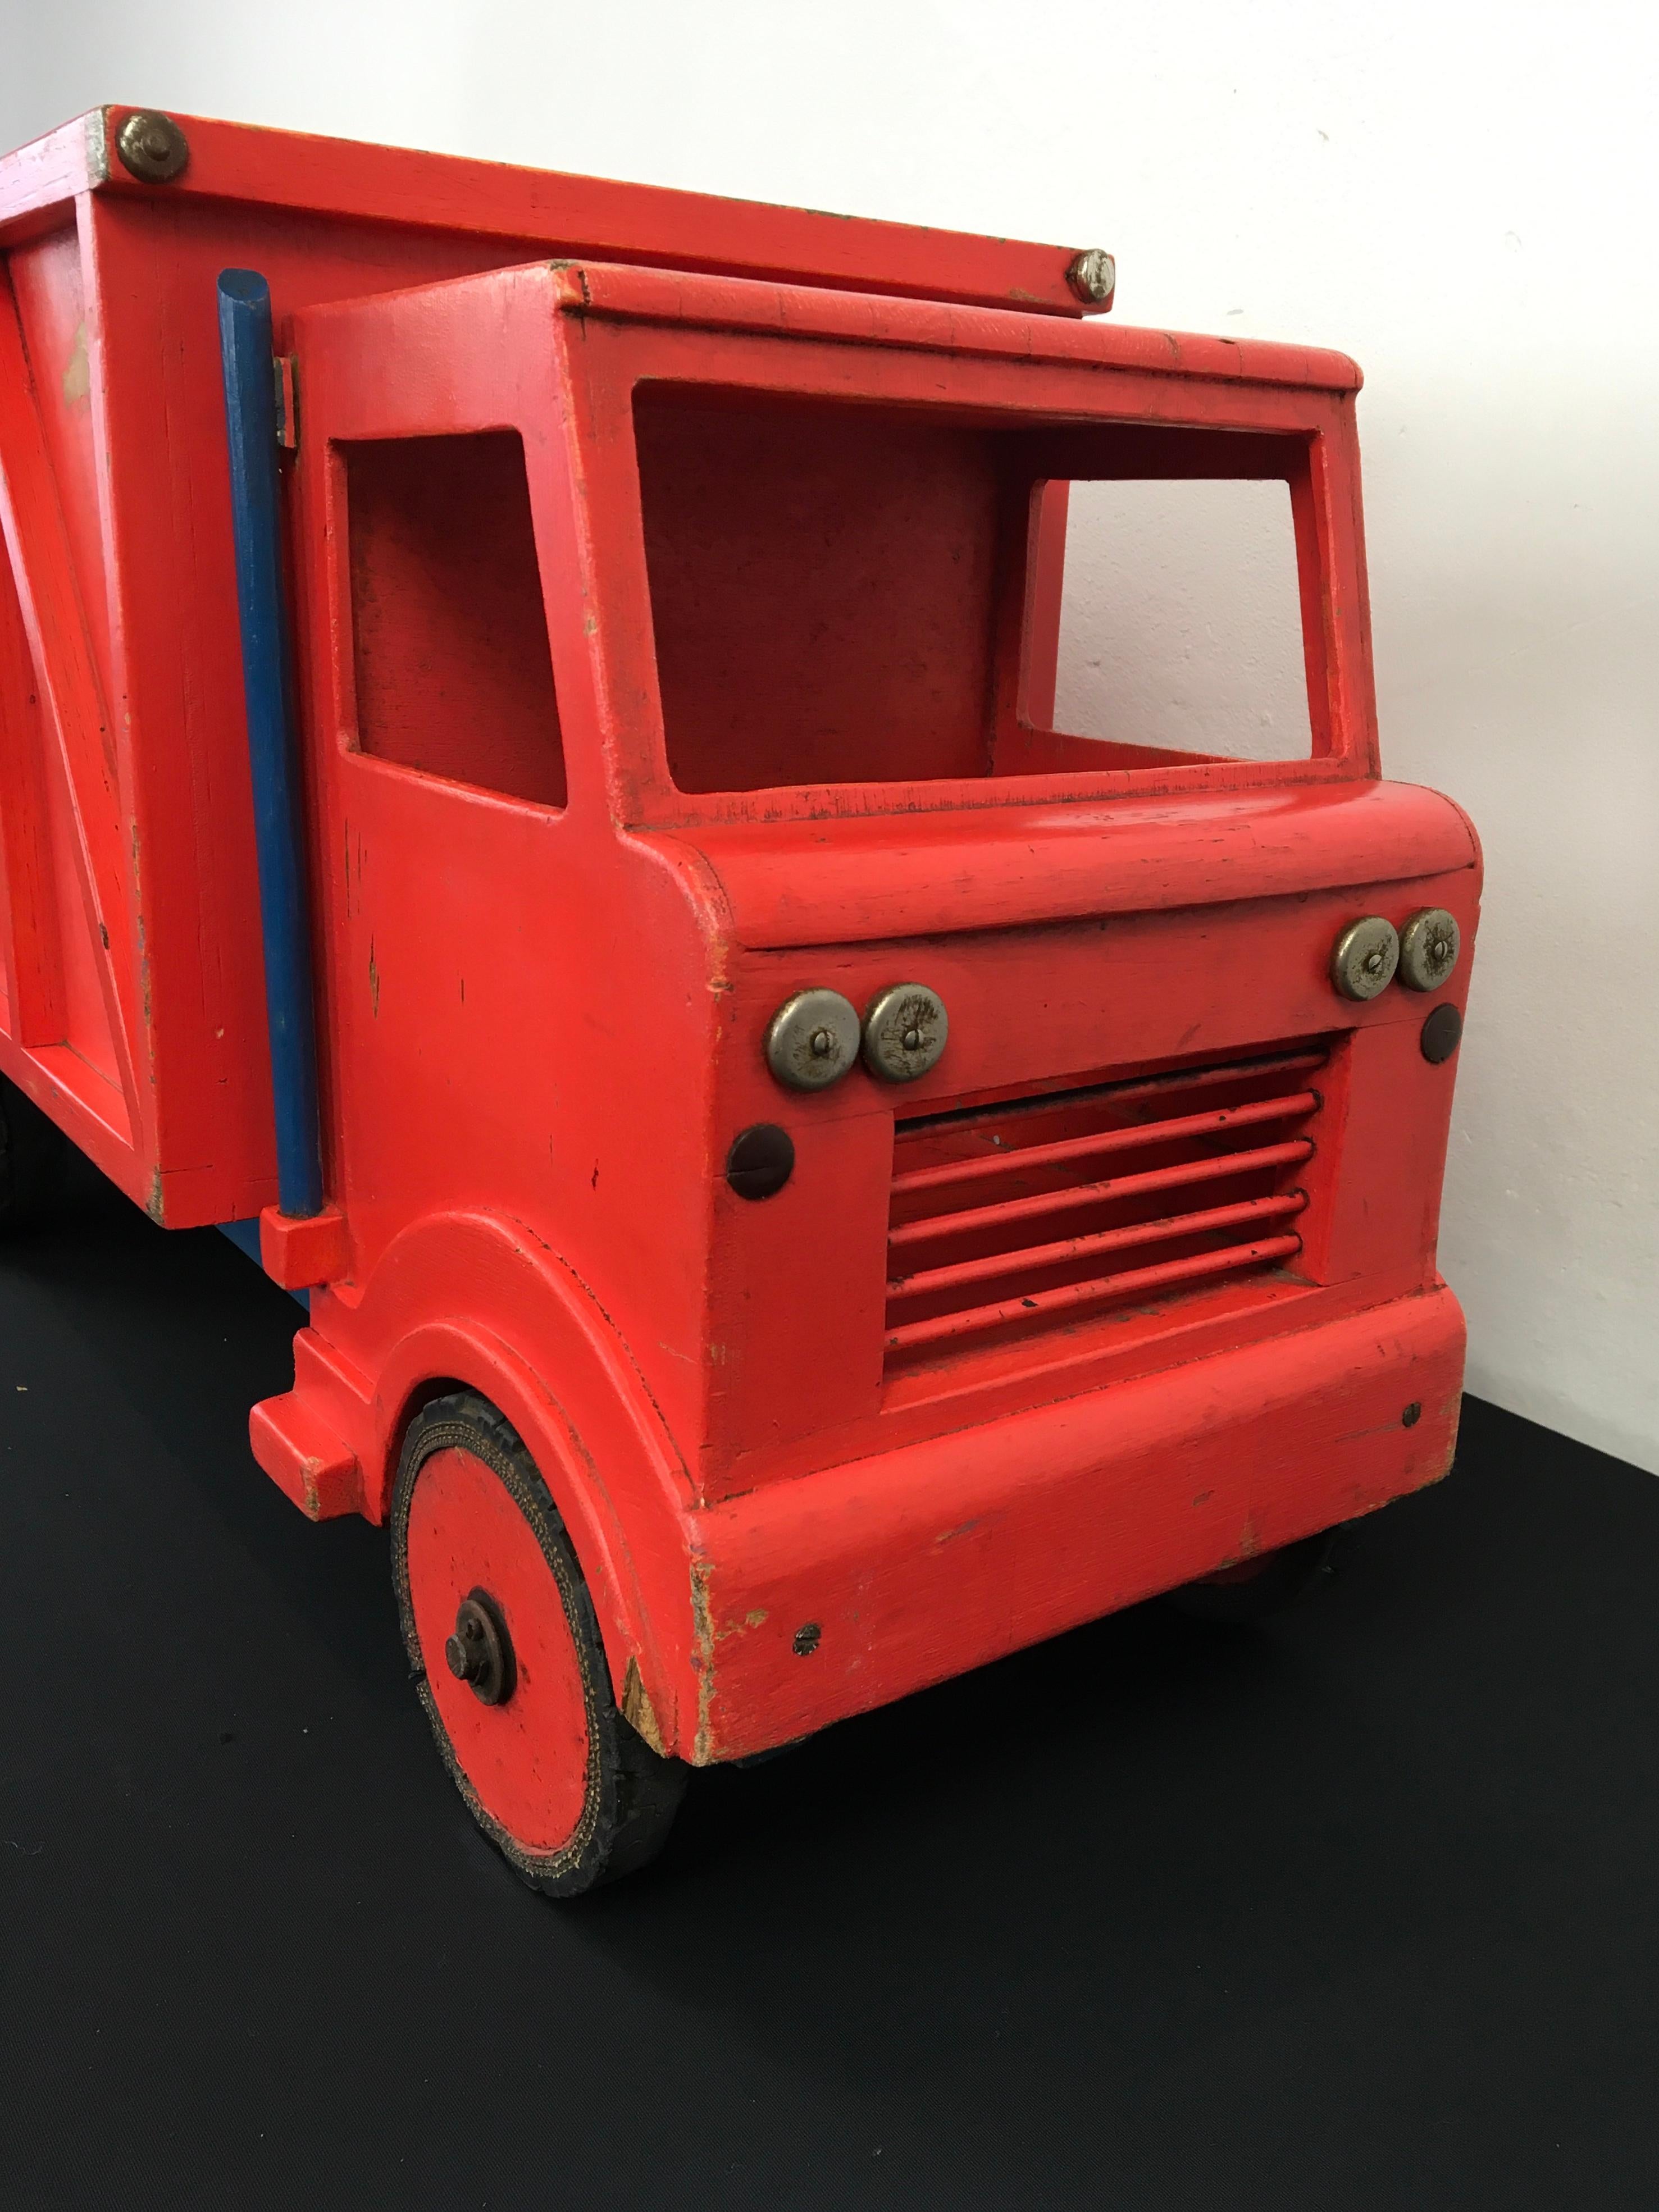 XL Red Wooden Dump Truck Toy, 1950s In Good Condition For Sale In Antwerp, BE